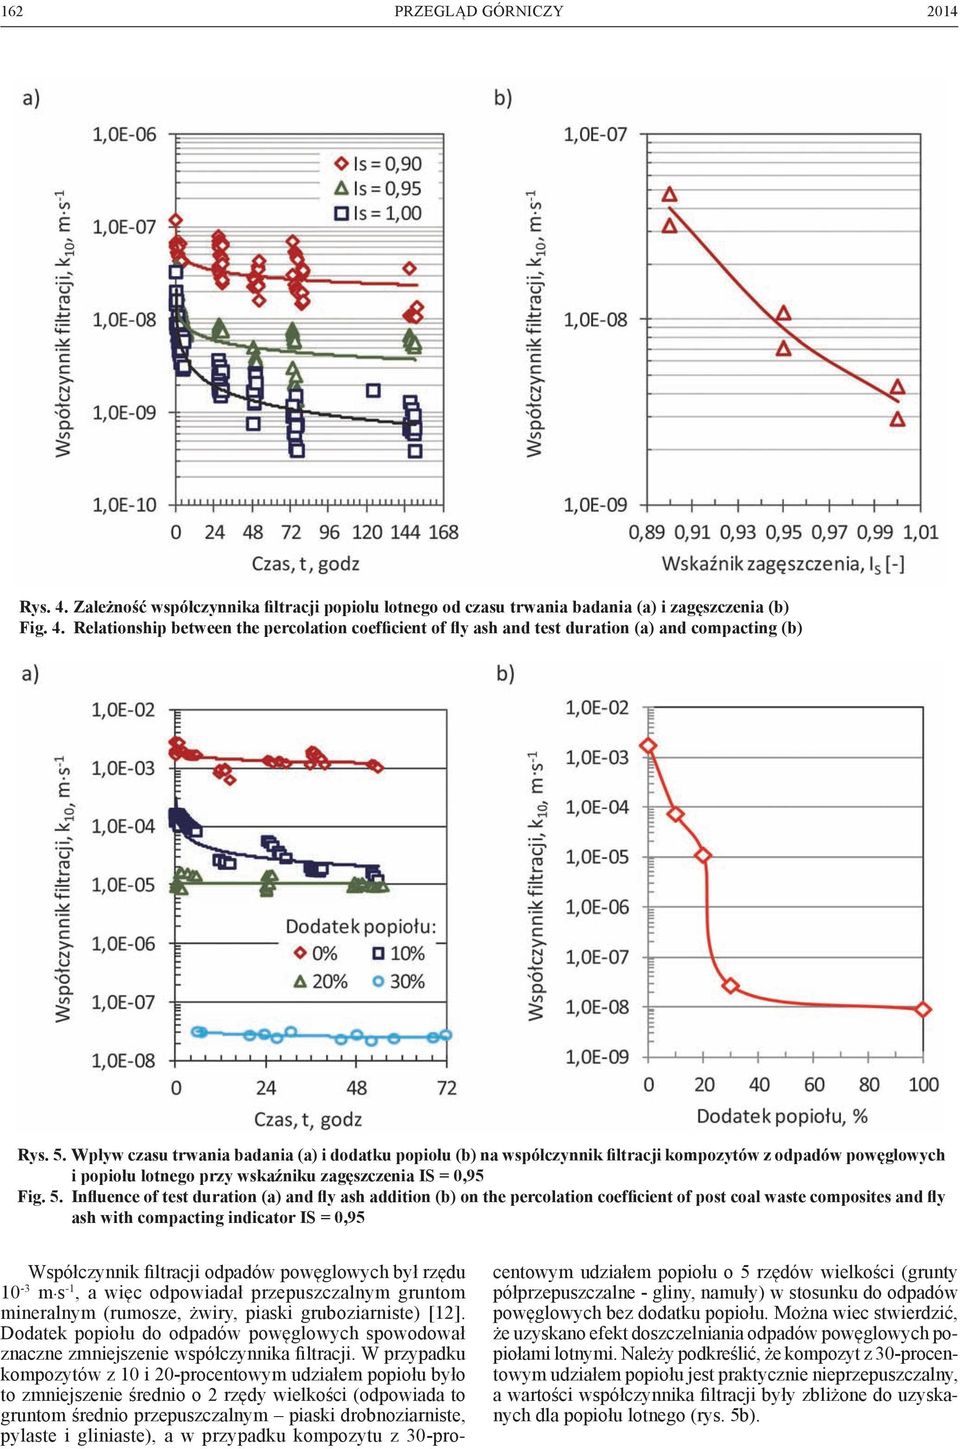 Influence of test duration (a) and fly ash addition (b) on the percolation coefficient of post coal waste composites and fly ash with compacting indicator IS = 0,95 Współczynnik filtracji odpadów